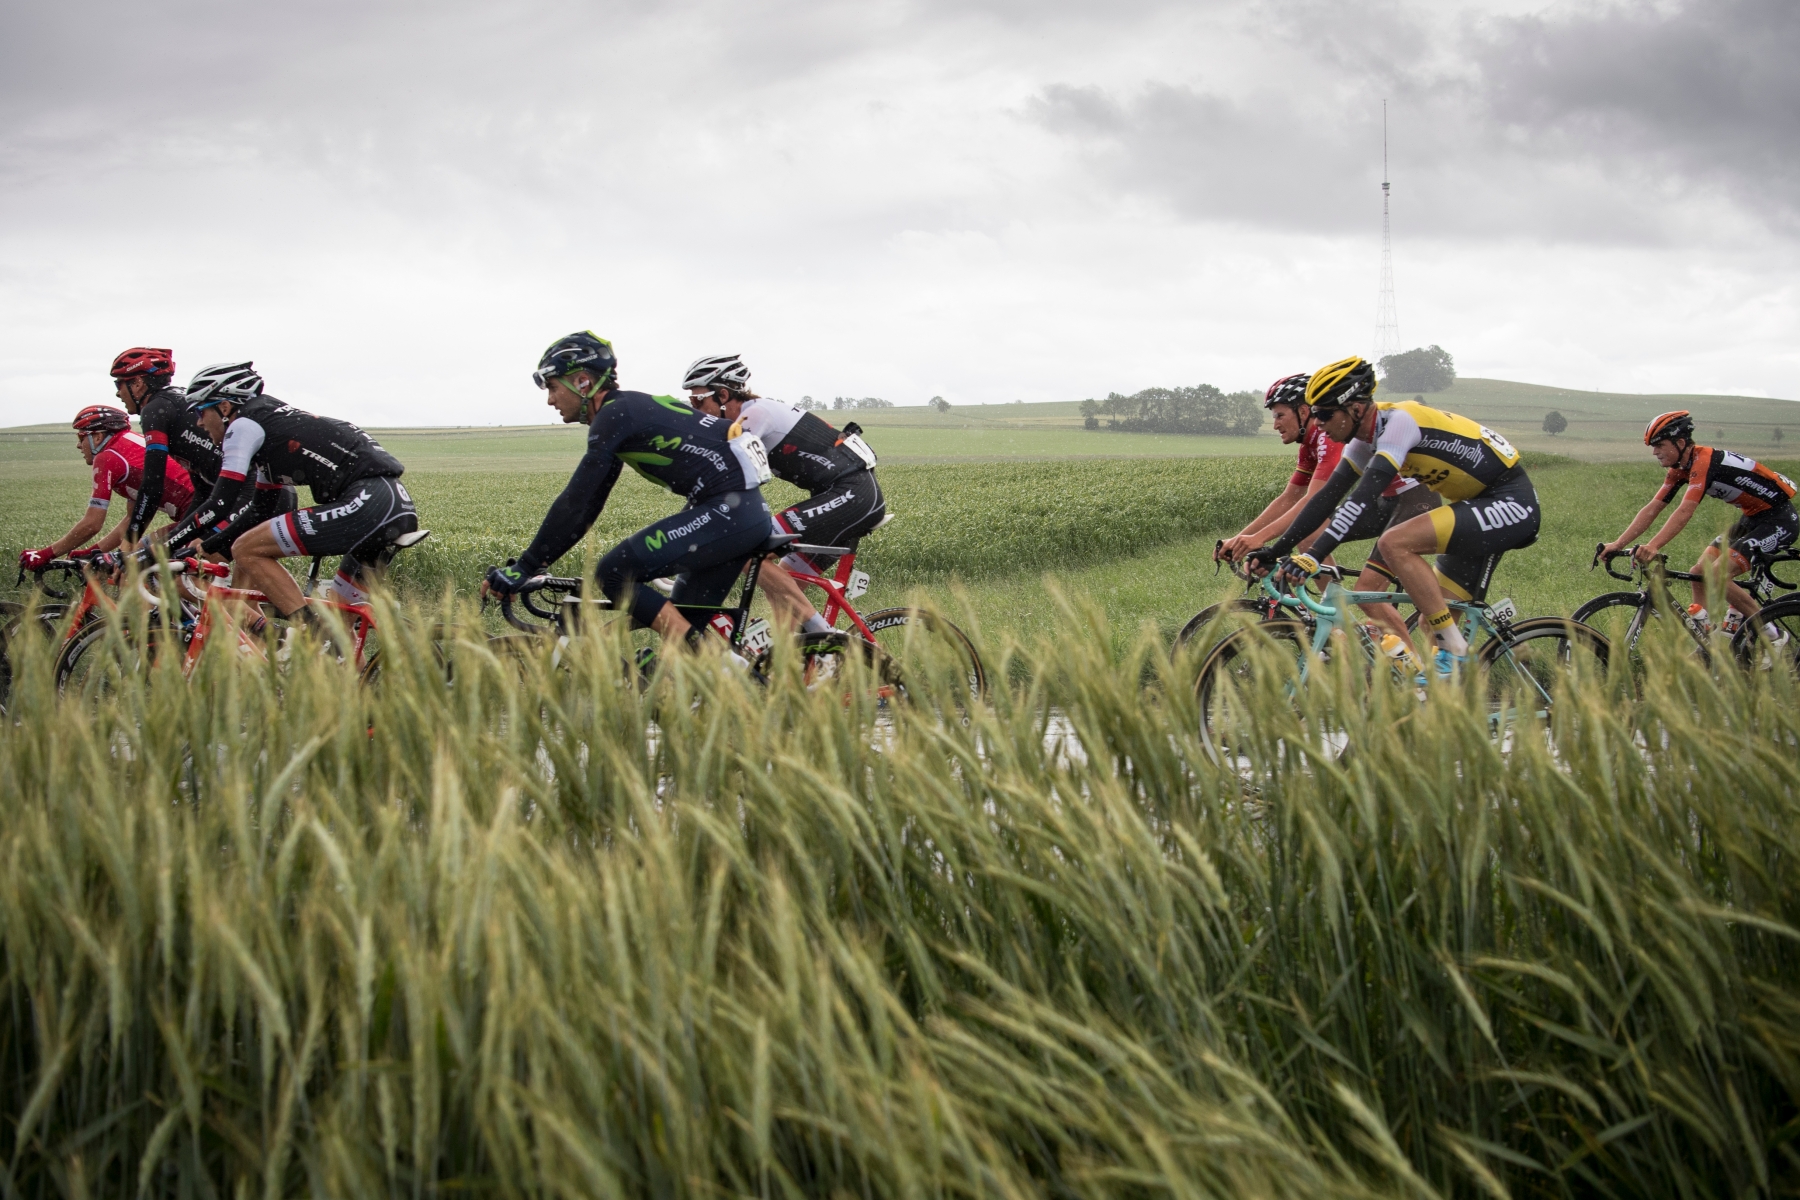 The pack rides in front of the radio mast "Beromuenster" , during the 3rd stage, a 192,6 km race from Grosswangen to Rheinfelden, Switzerland, at the 80th Tour de Suisse UCI ProTour cycling race, on Monday, June 13, 2016. (KEYSTONE/Gian Ehrenzeller) SWITZERLAND CYCLING TOUR DE SUISSE 2016